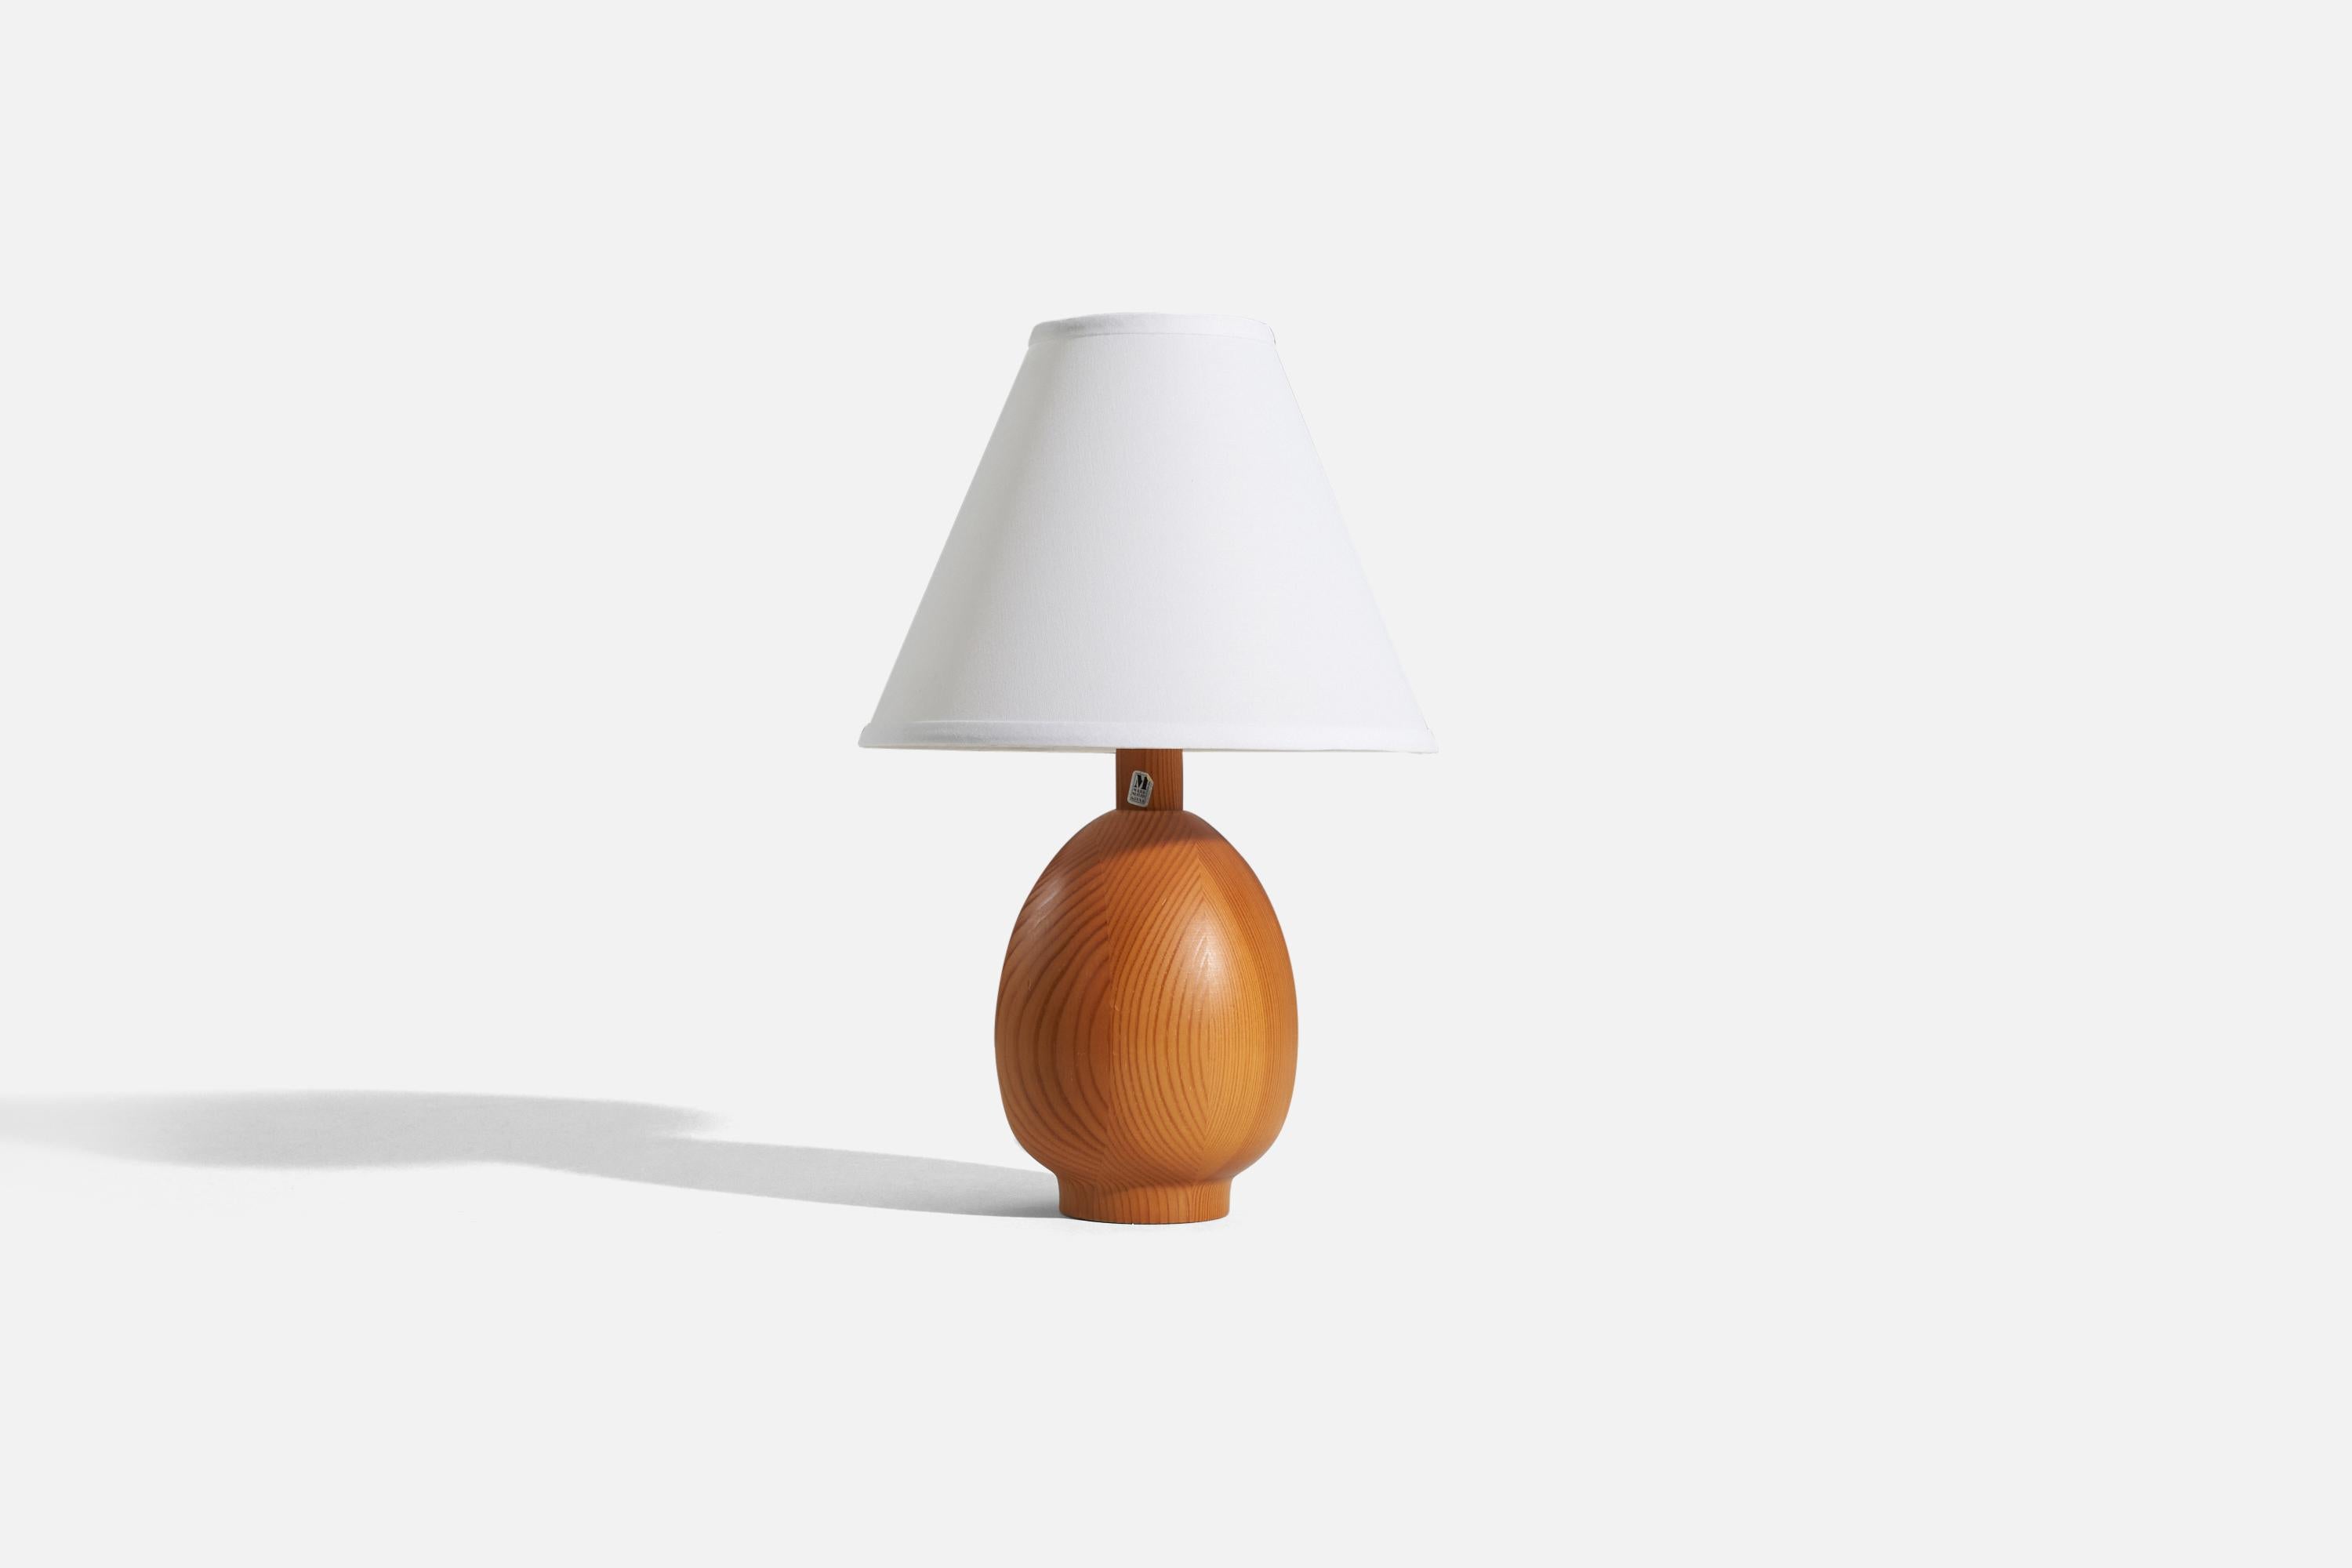 A solid pine table lamp designed and produced by Markslöjd, Kinna, Sweden, c. 1970s.

Sold without lampshade. 
Dimensions of Lamp (inches) : 11.3125 x 5 x 5 (H x W x D)
Dimensions of Shade (inches) : 4.25 x 10.25 x 8 (T x B x H)
Dimension of